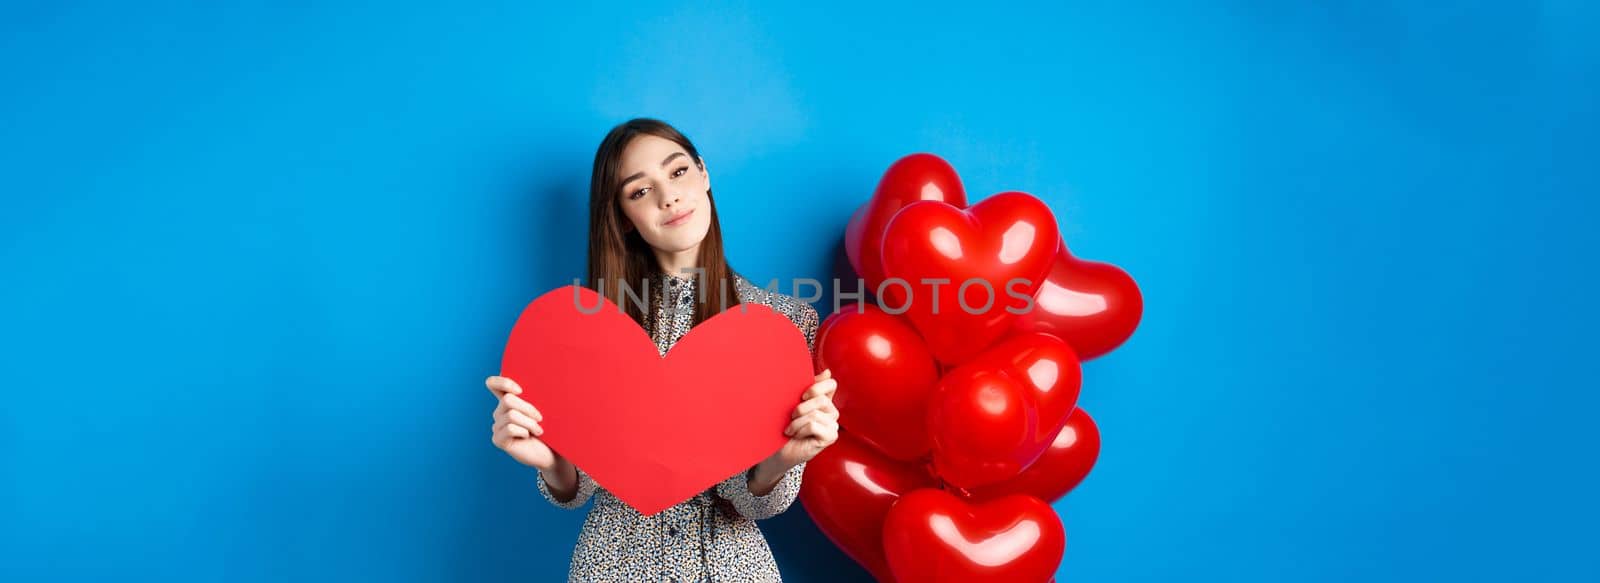 Valentines day. Romantic girl in dress showing big red heart cutout, dreaming of love, standing near holiday balloons on blue background by Benzoix